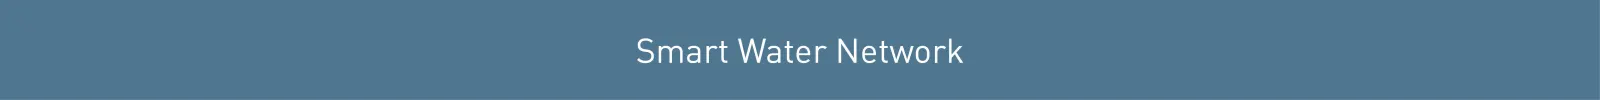 Moen - Brand Page - Smart Water Networks Banner Image